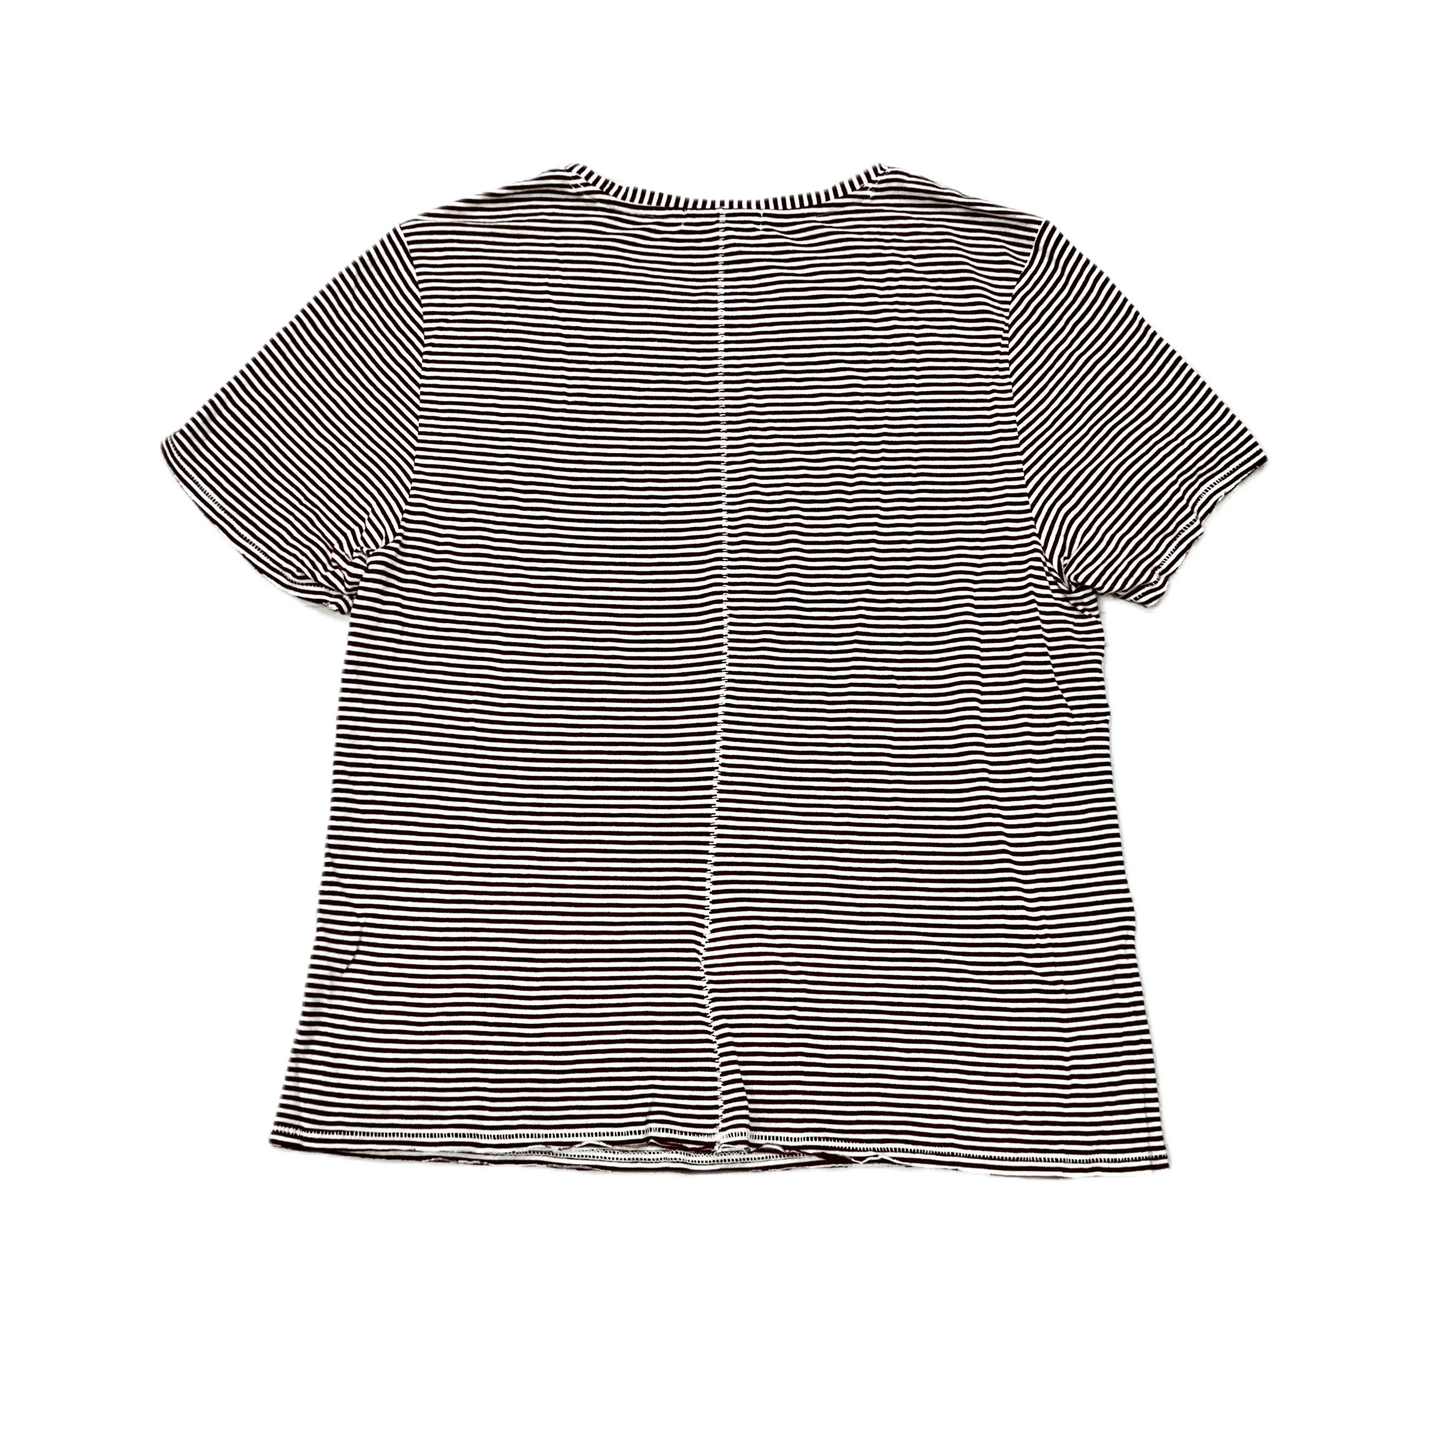 Striped Pattern Top Short Sleeve Designer By Rag And Bone, Size: M